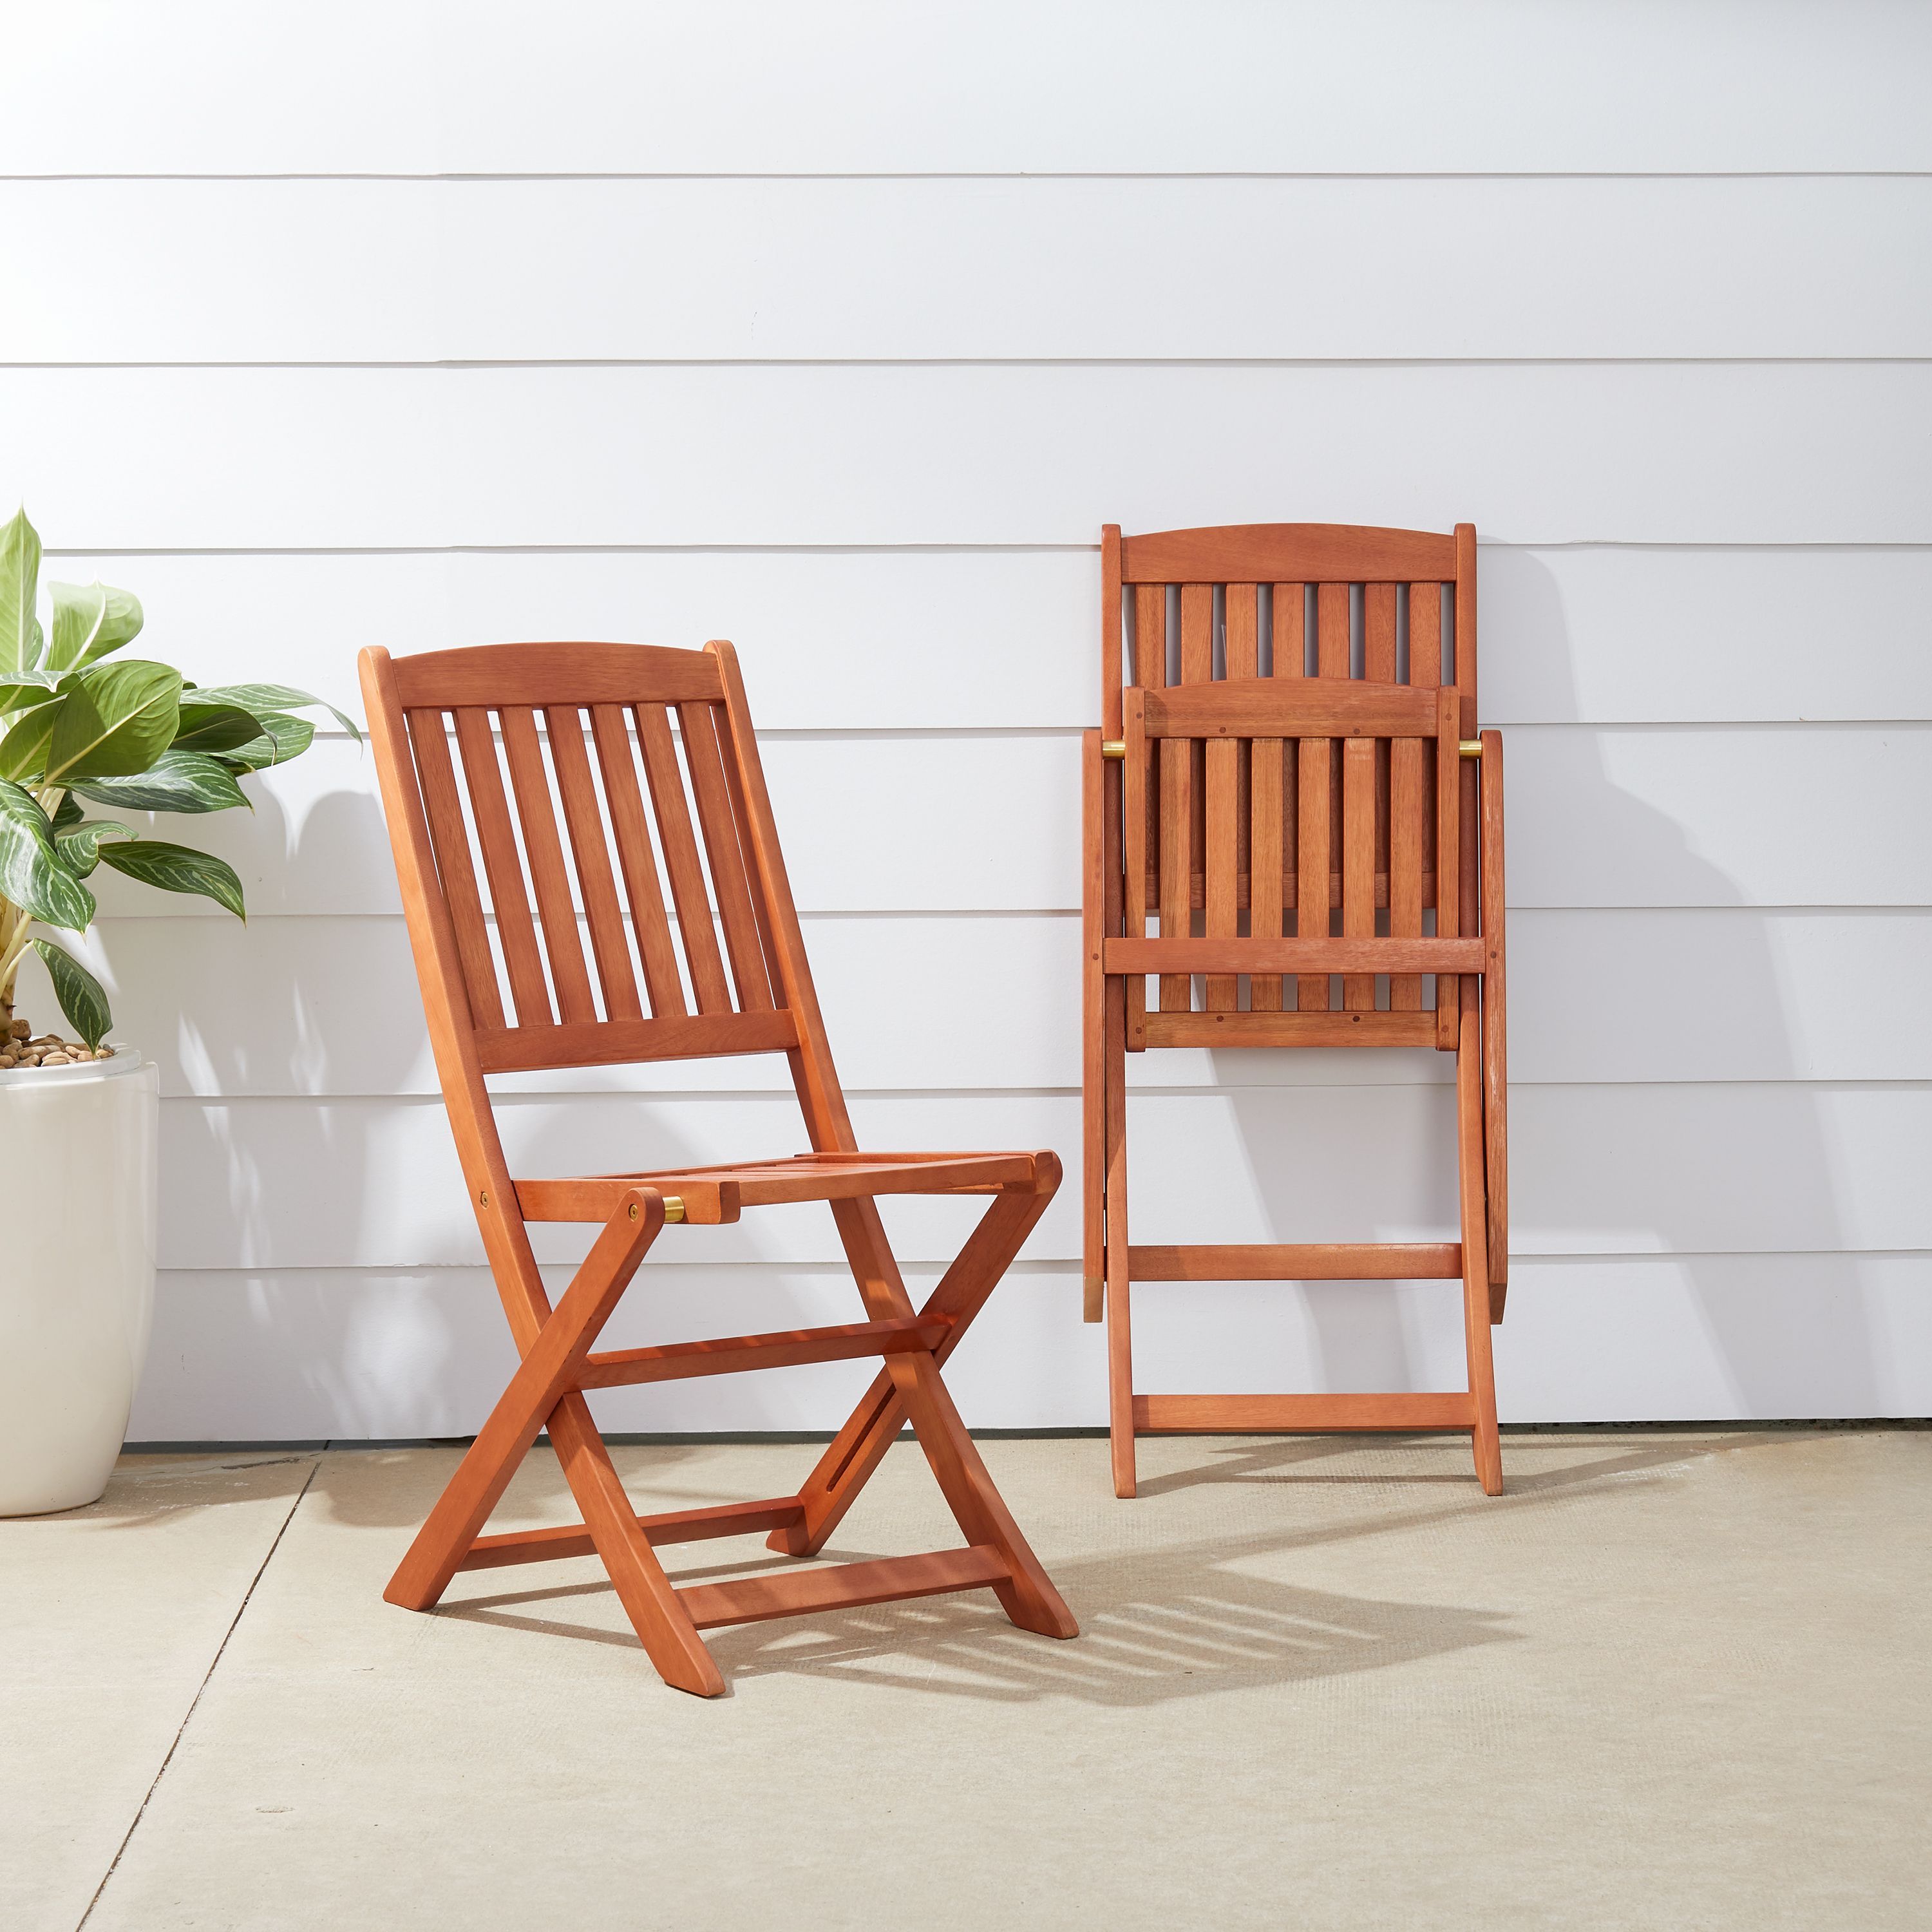 Malibu Outdoor Patio 3-Piece Wood Dining Set with Folding Chair - image 2 of 6